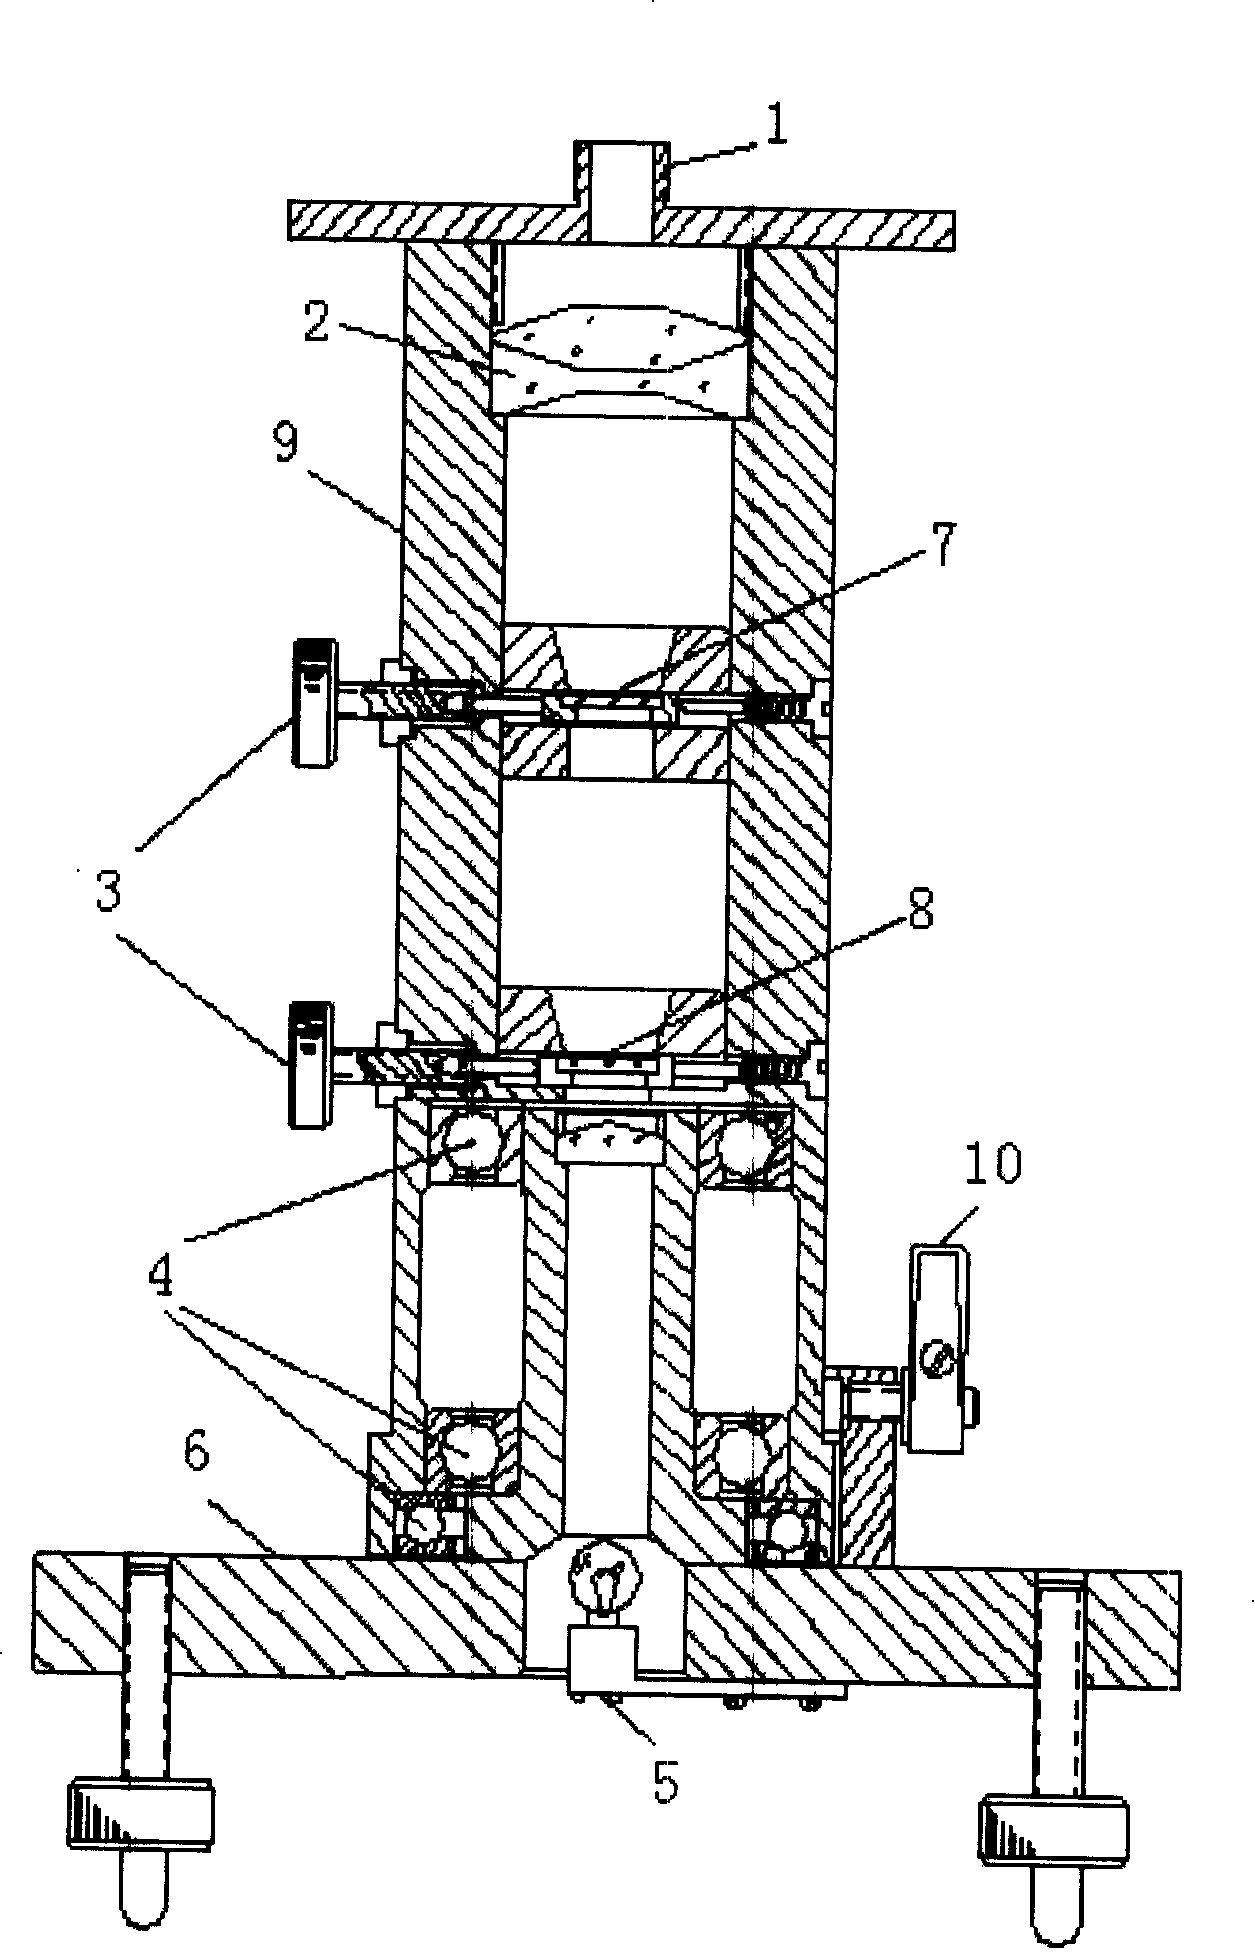 Optical point-checking device correcting instrument